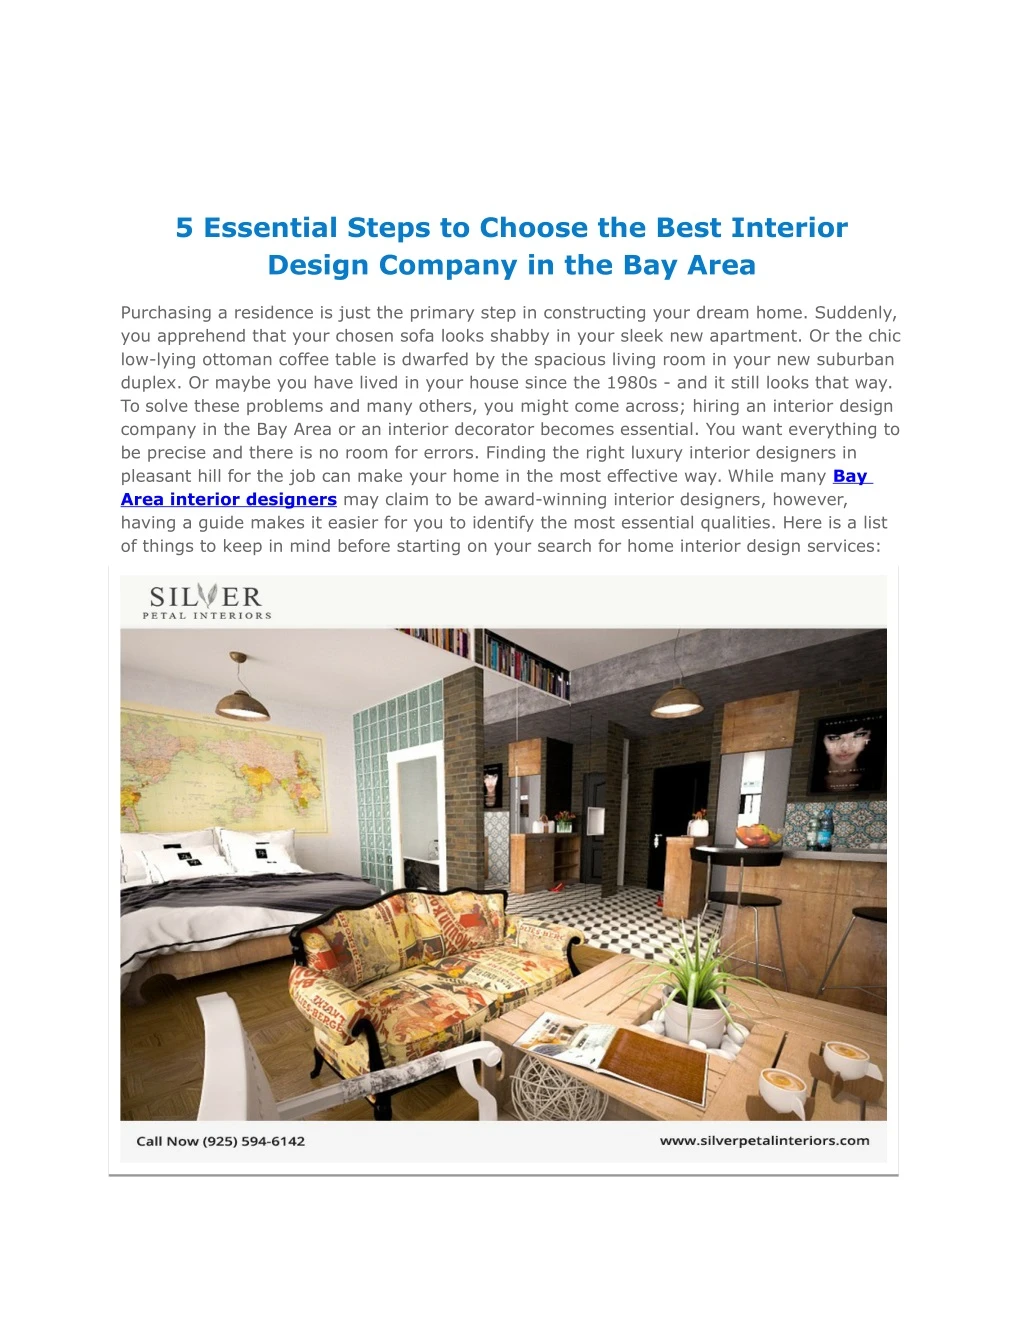 5 essential steps to choose the best interior